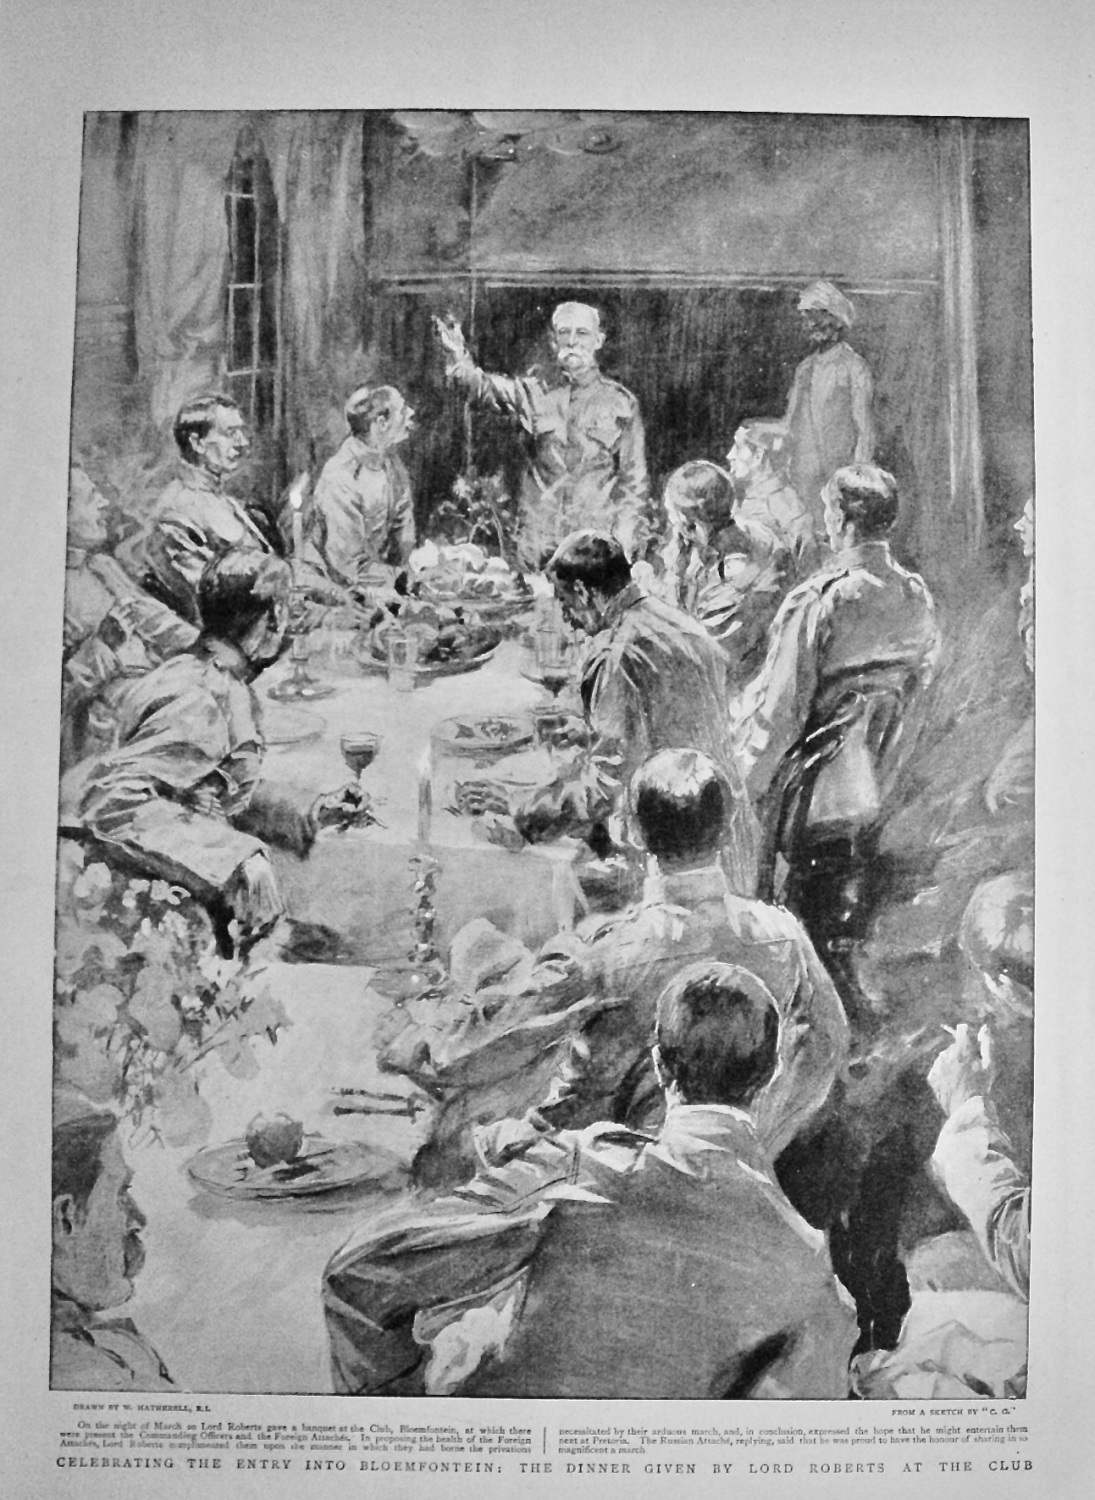 Celebrating the Entry into Bloemfontein :  The Dinner given by Lord Roberts